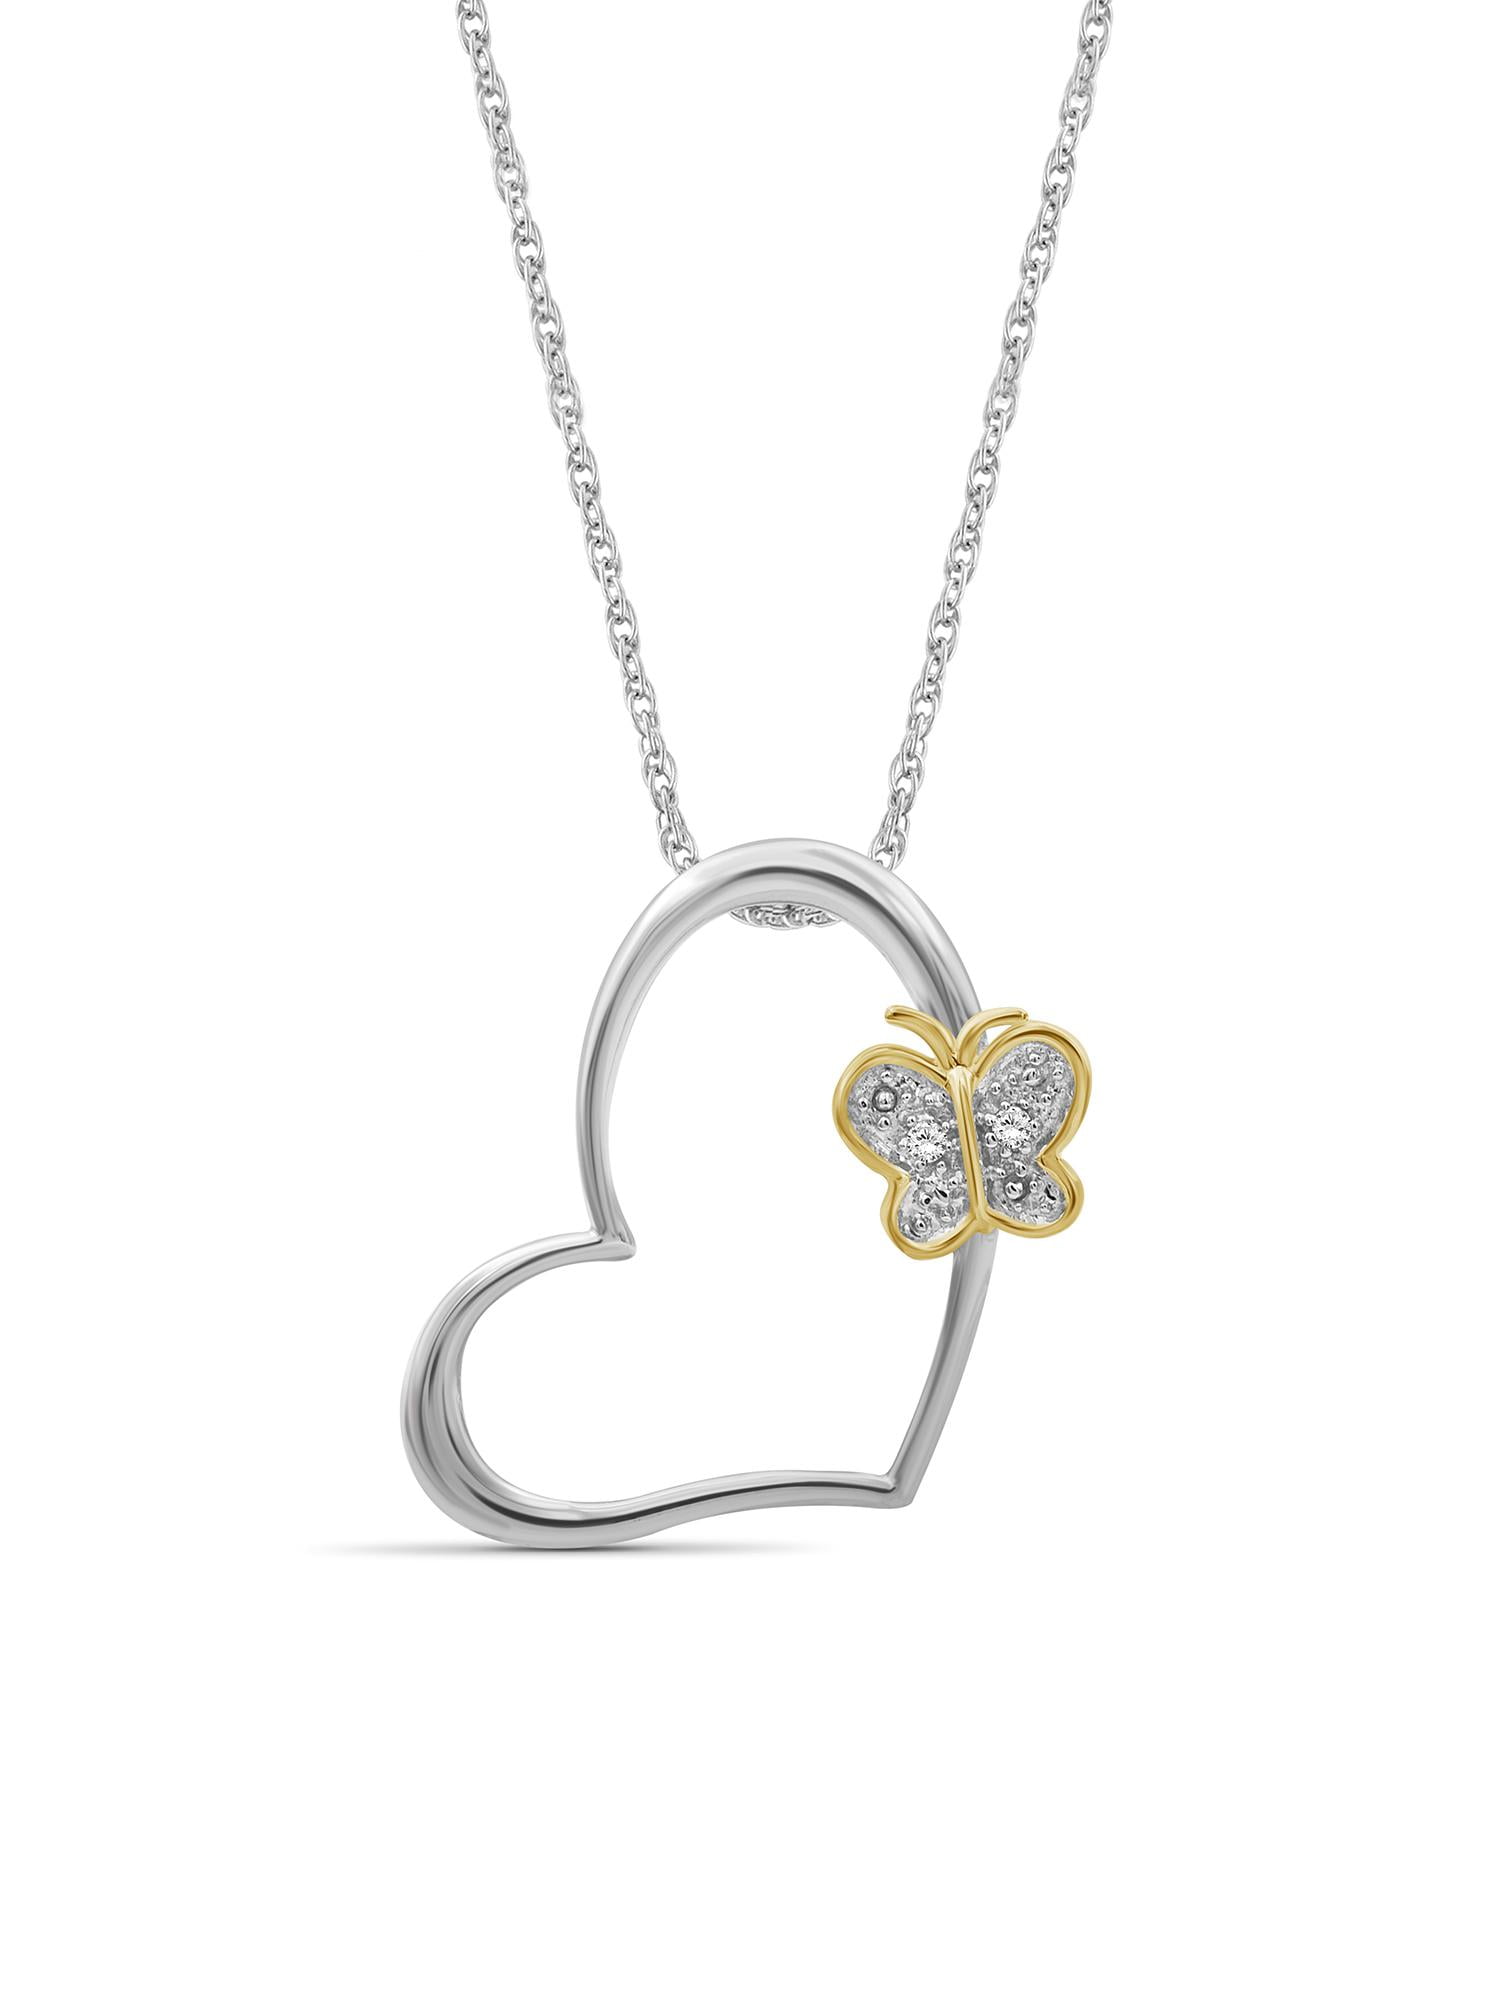 Details about   14K Yellow Gold Finish Women's Open Heart Pretty Necklace For Special Gift